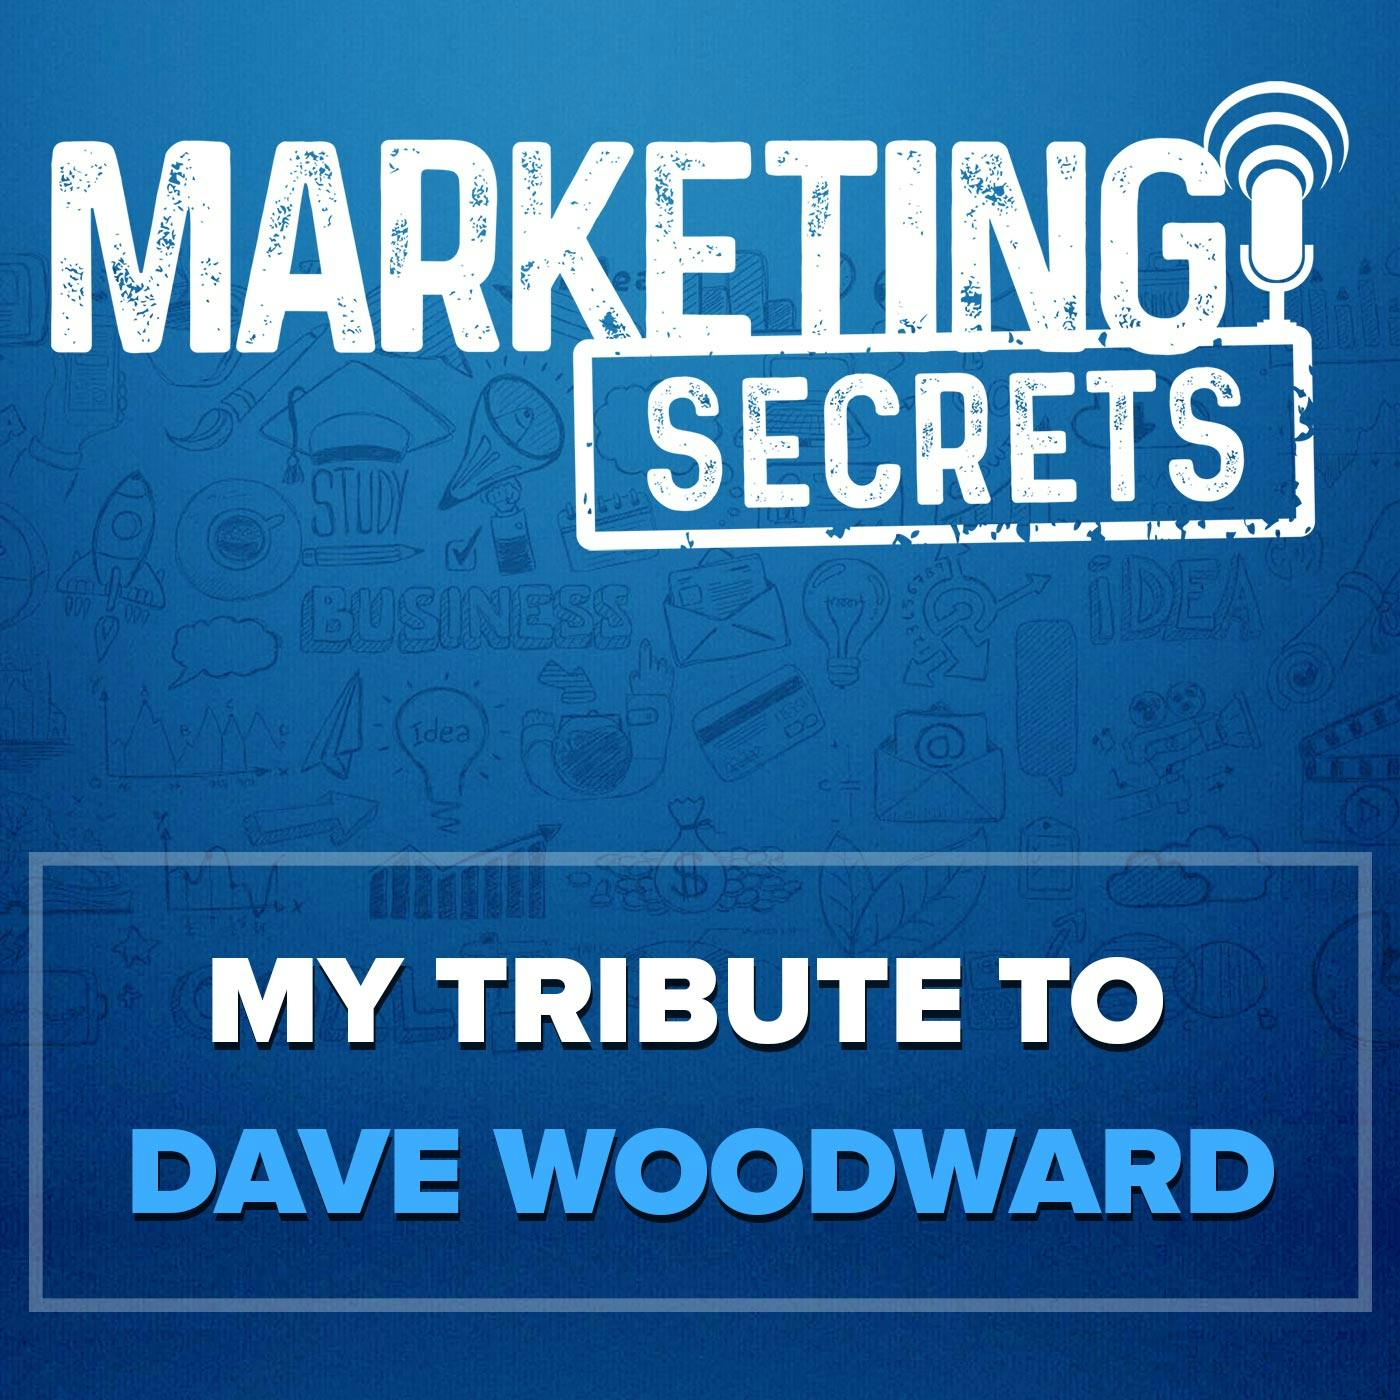 My Tribute to Dave Woodward by Russell Brunson